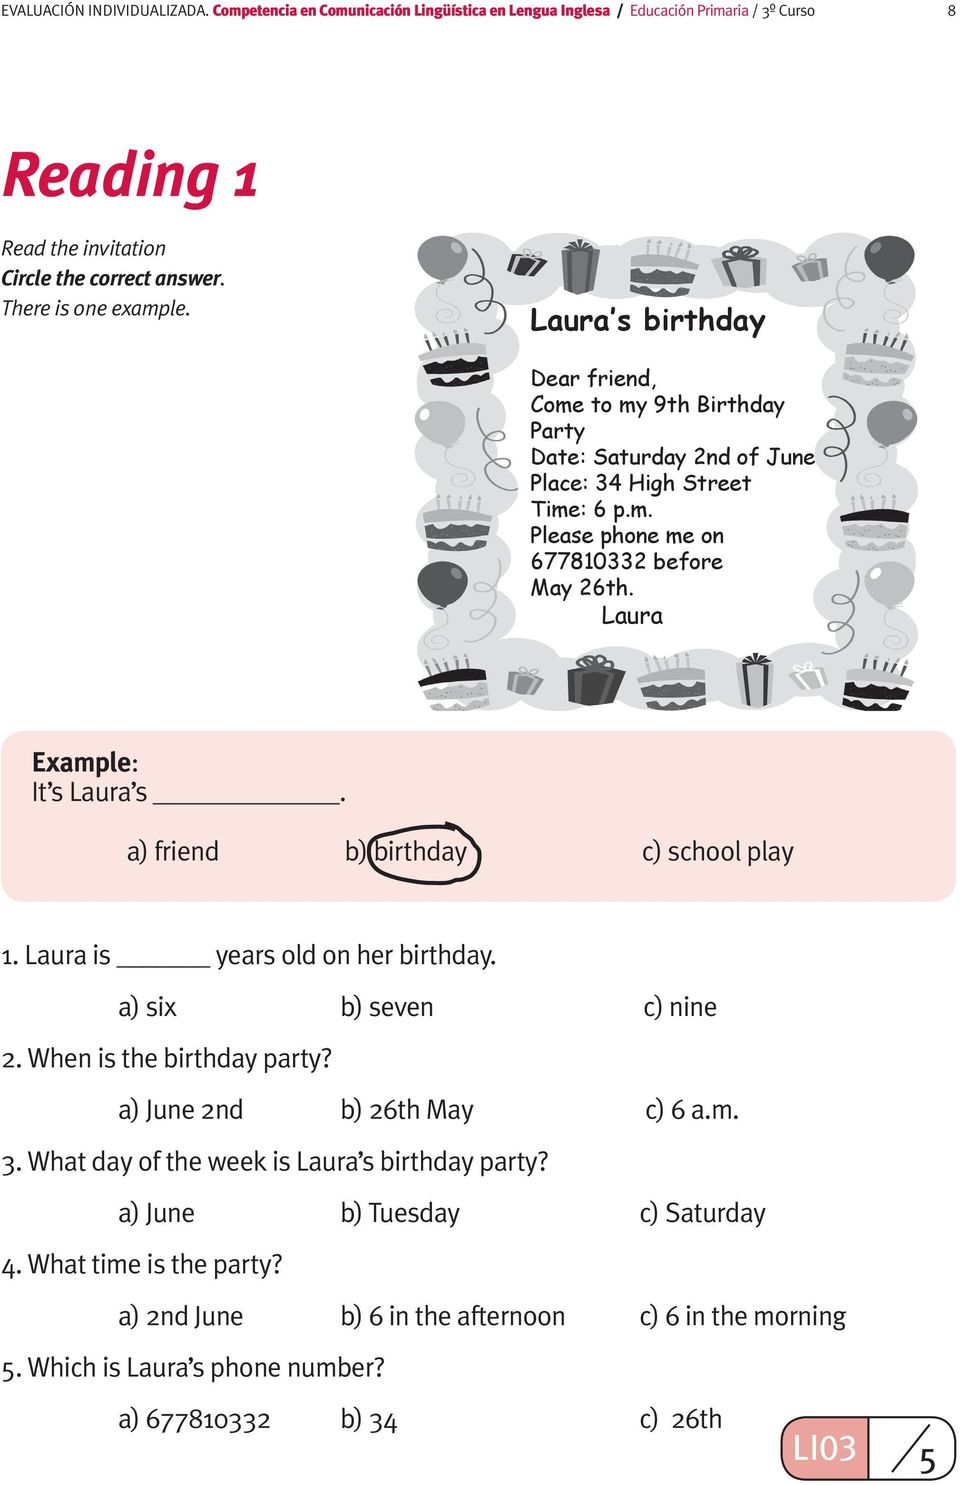 a) friend b) birthday c) school play 1. Laura is years old on her birthday. a) six b) seven c) nine 2. When is the birthday party? a) June 2nd b) 26th May c) 6 a.m. 3.